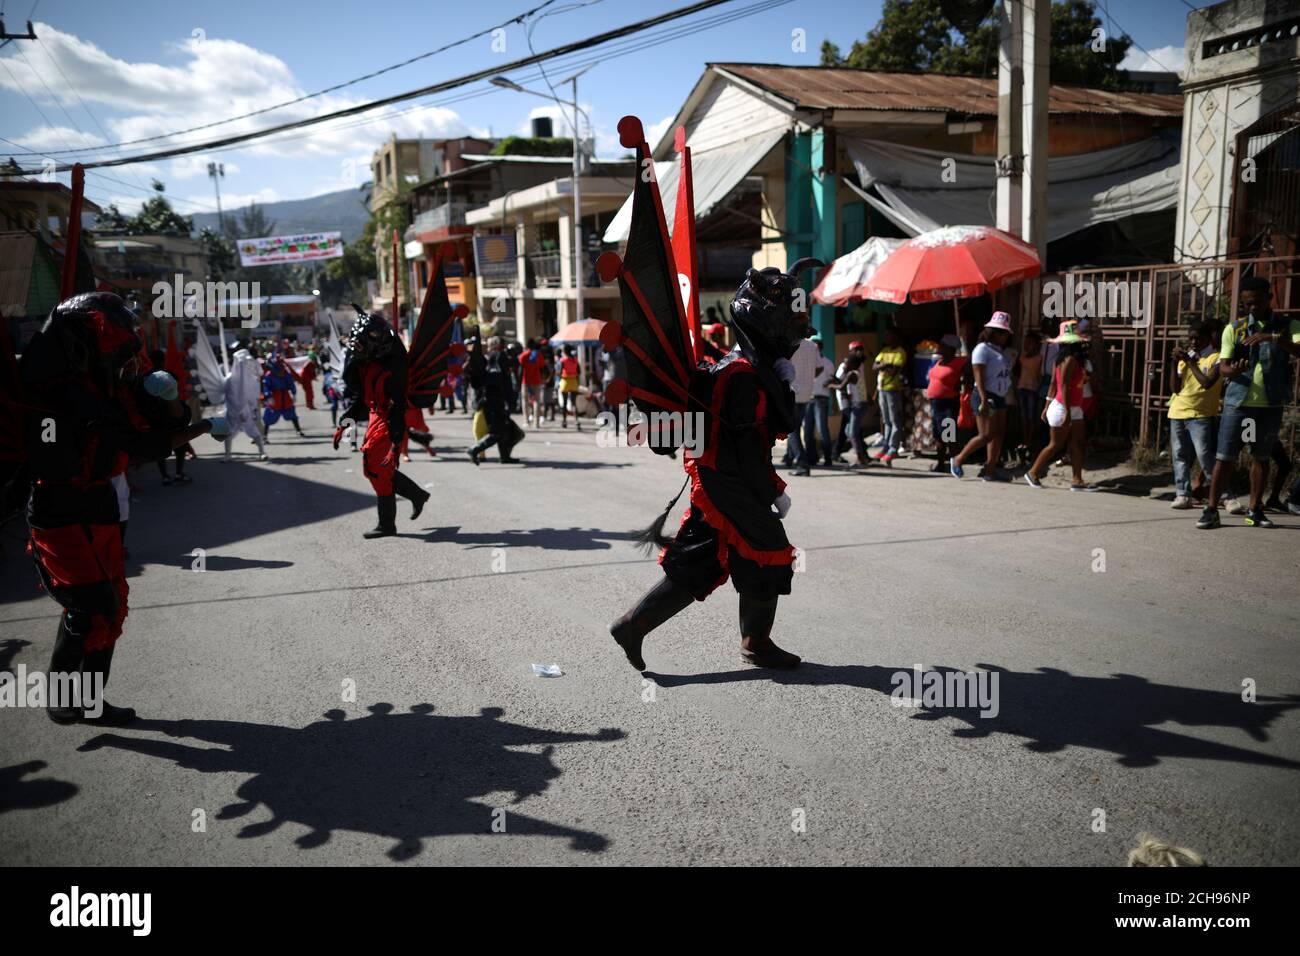 Revellers Parade Along A Street At The Carnival Of Jacmel, Haiti, February 4, 2018. Reuters/Andres Martinez Casares Stock Photo - Alamy